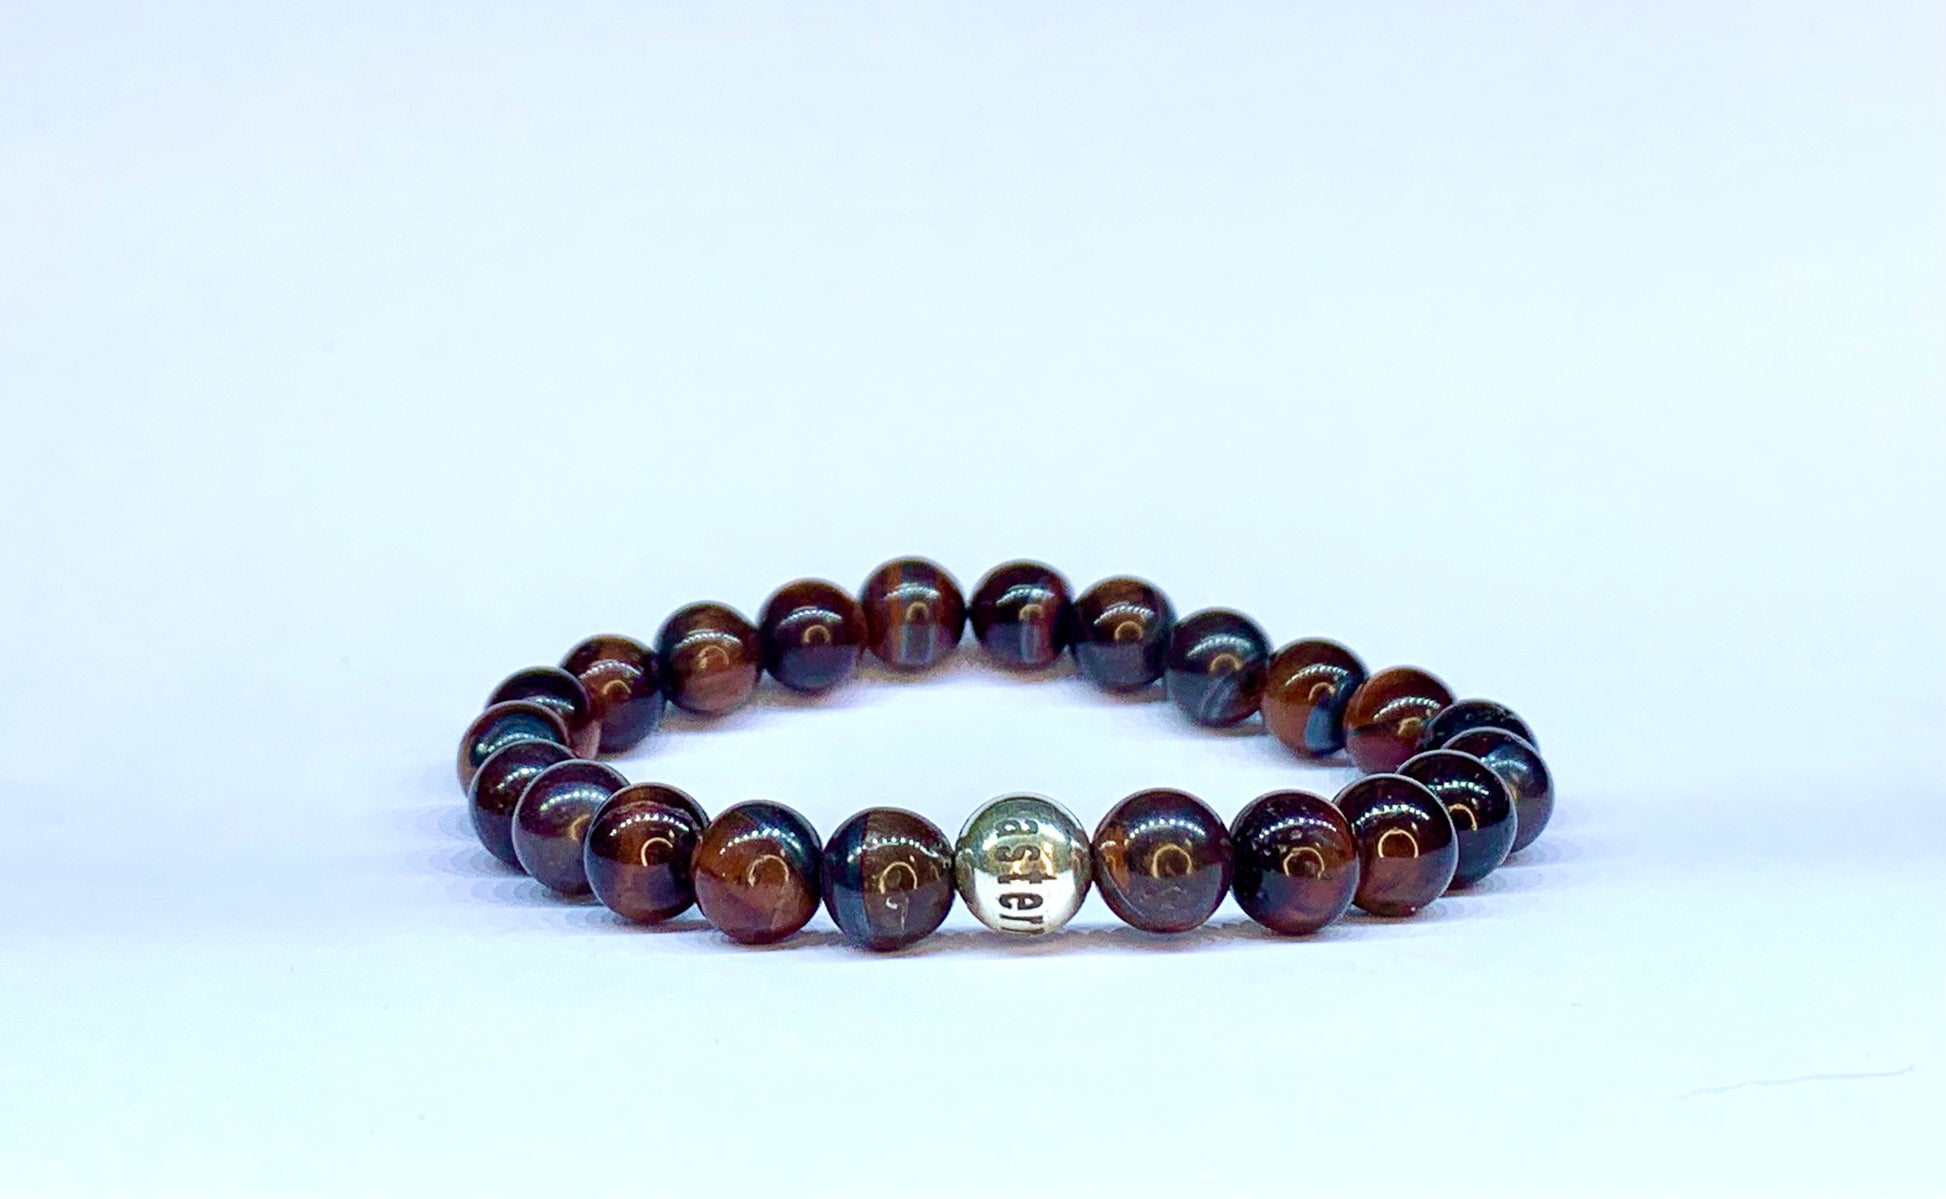 Red Tiger's Eye bead bracelet, with Eastern Adornment branded silver bead.